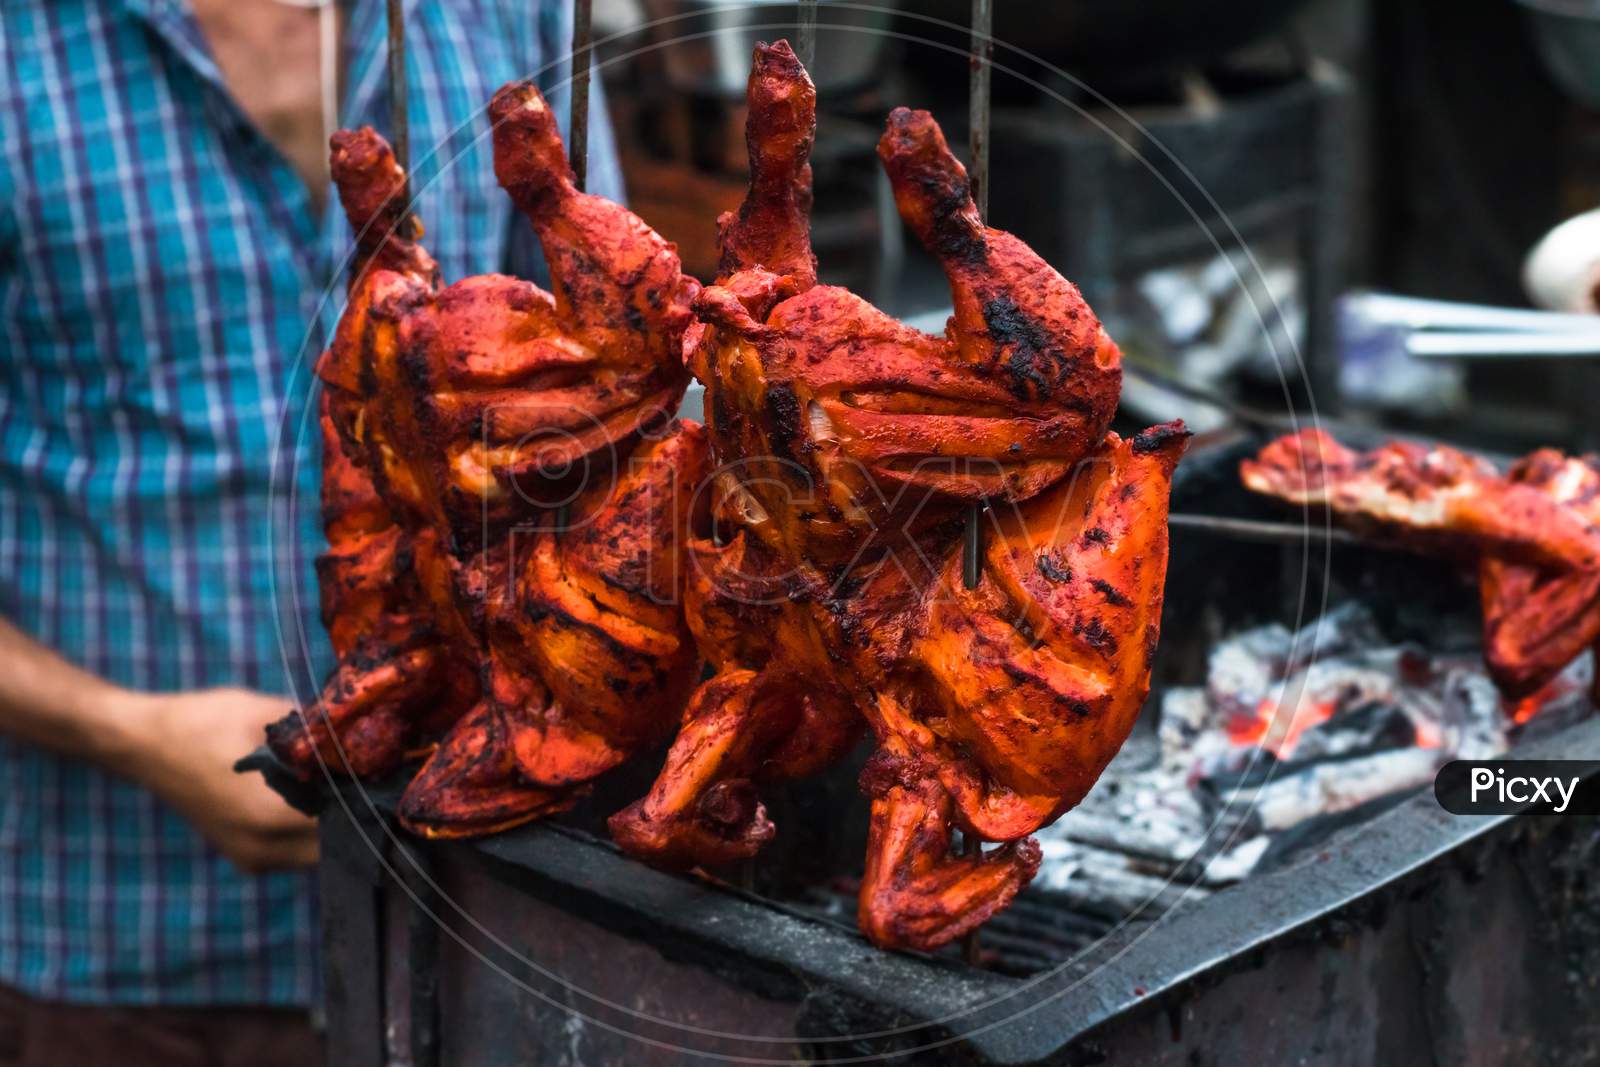 Indian Style Roasted Chicken Or Tandoori Chicken . Indian Non Vegetarian Food. - Image